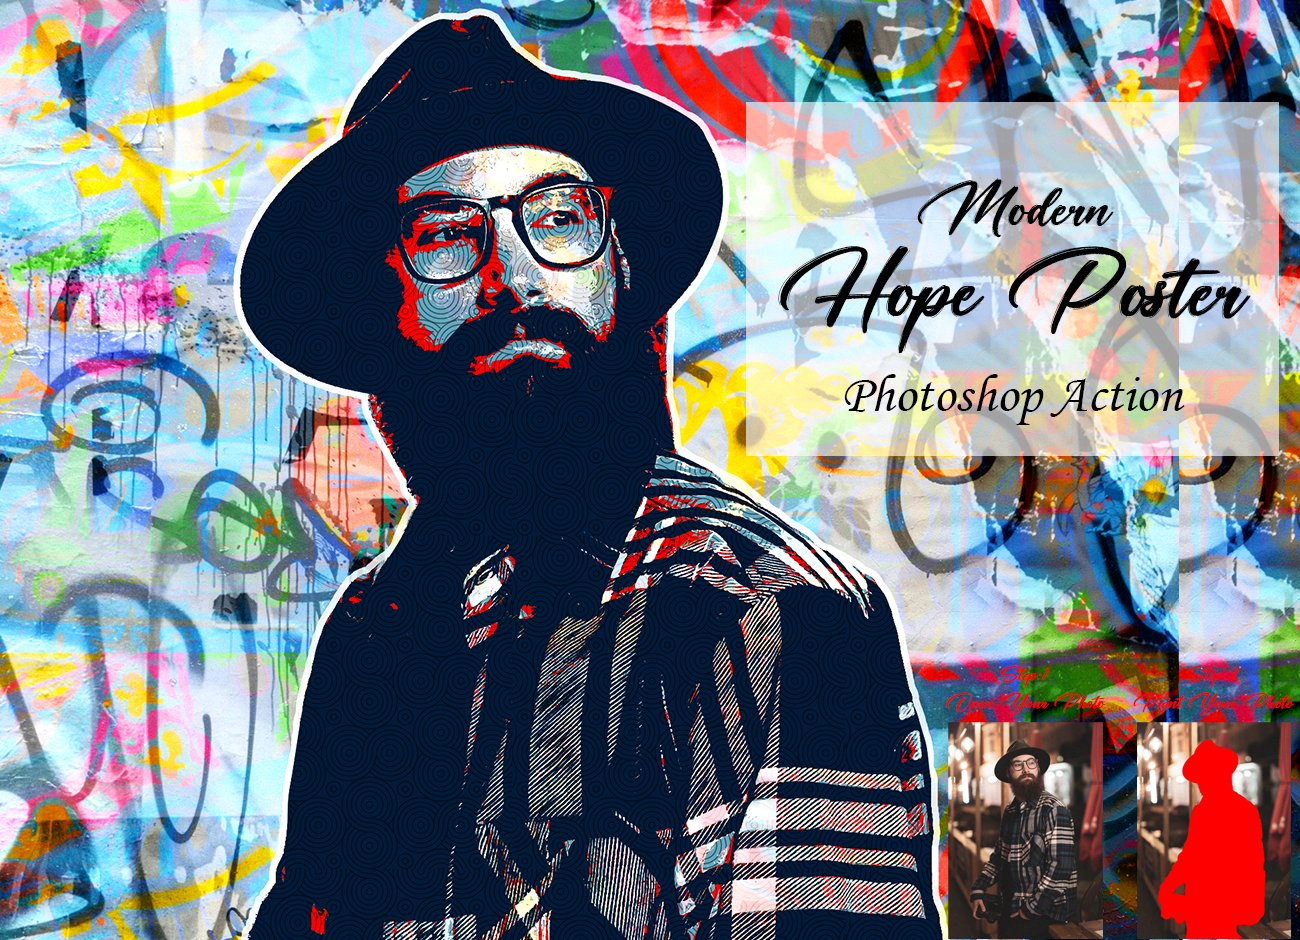 Modern Hope Poster Photoshop Actioncover image.